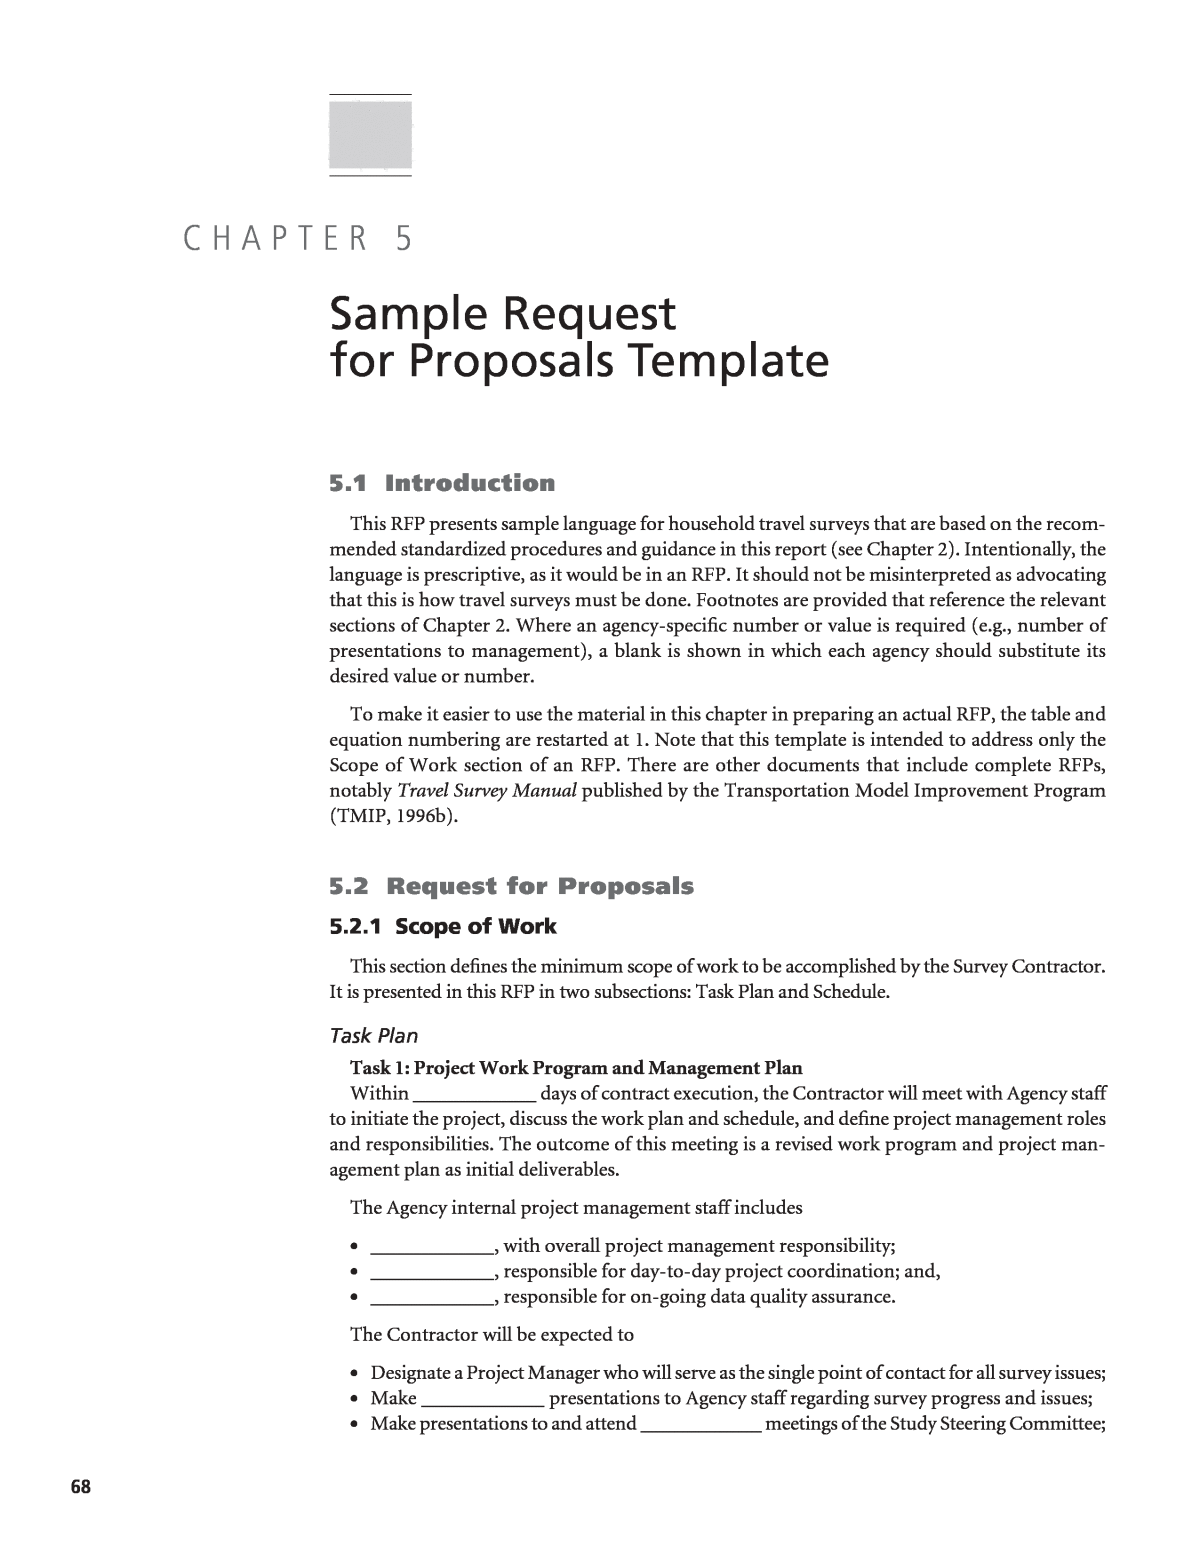 Chapter 5 - Sample Request for Proposals Template 